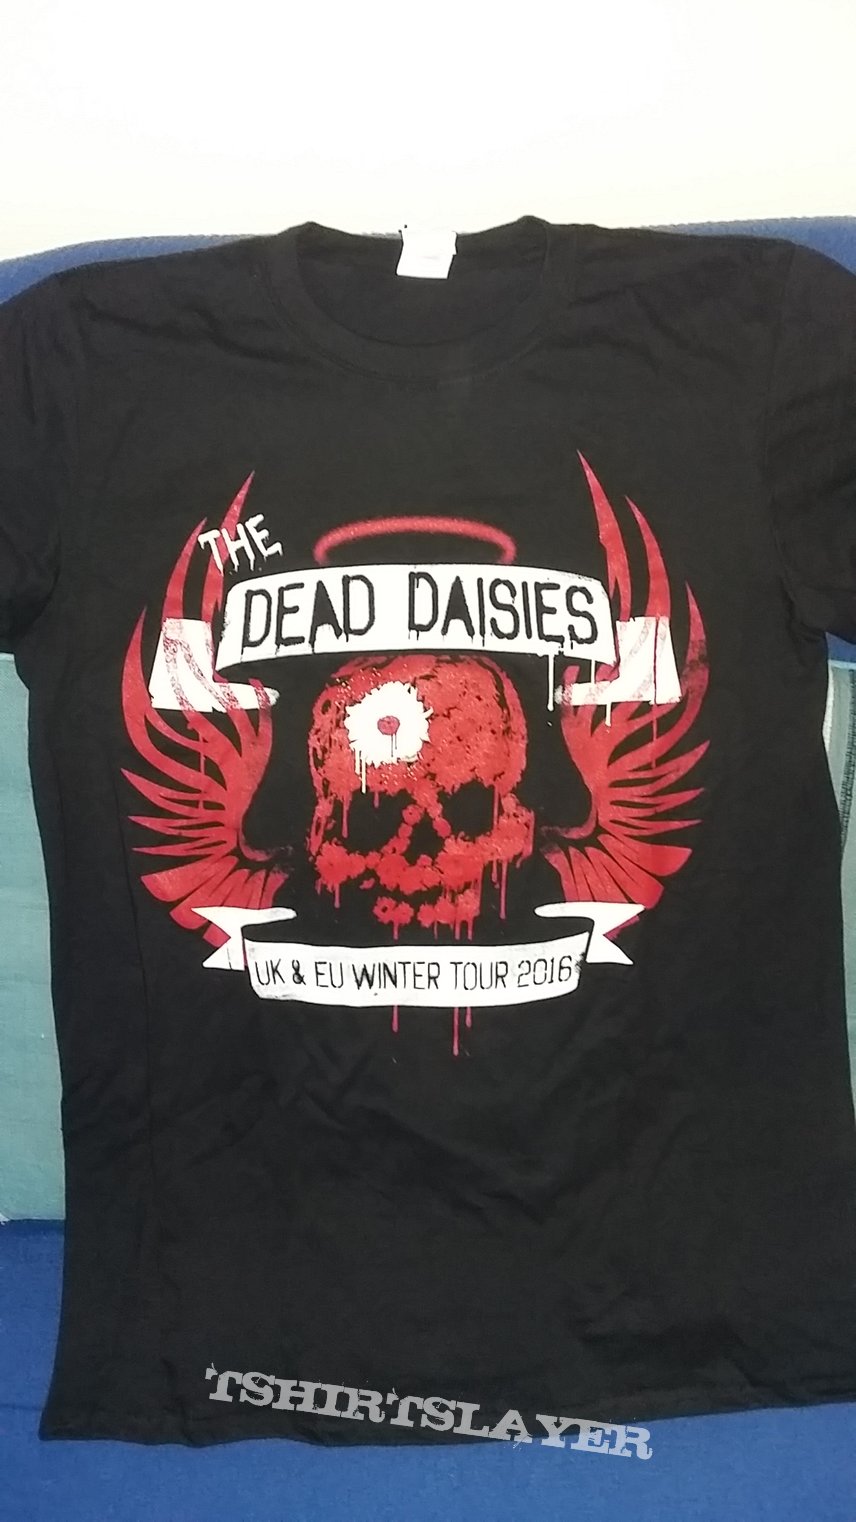 The Dead Daisies The Dead Daisies - UK & Europe Winter Tour 2016 |  TShirtSlayer TShirt and BattleJacket Gallery